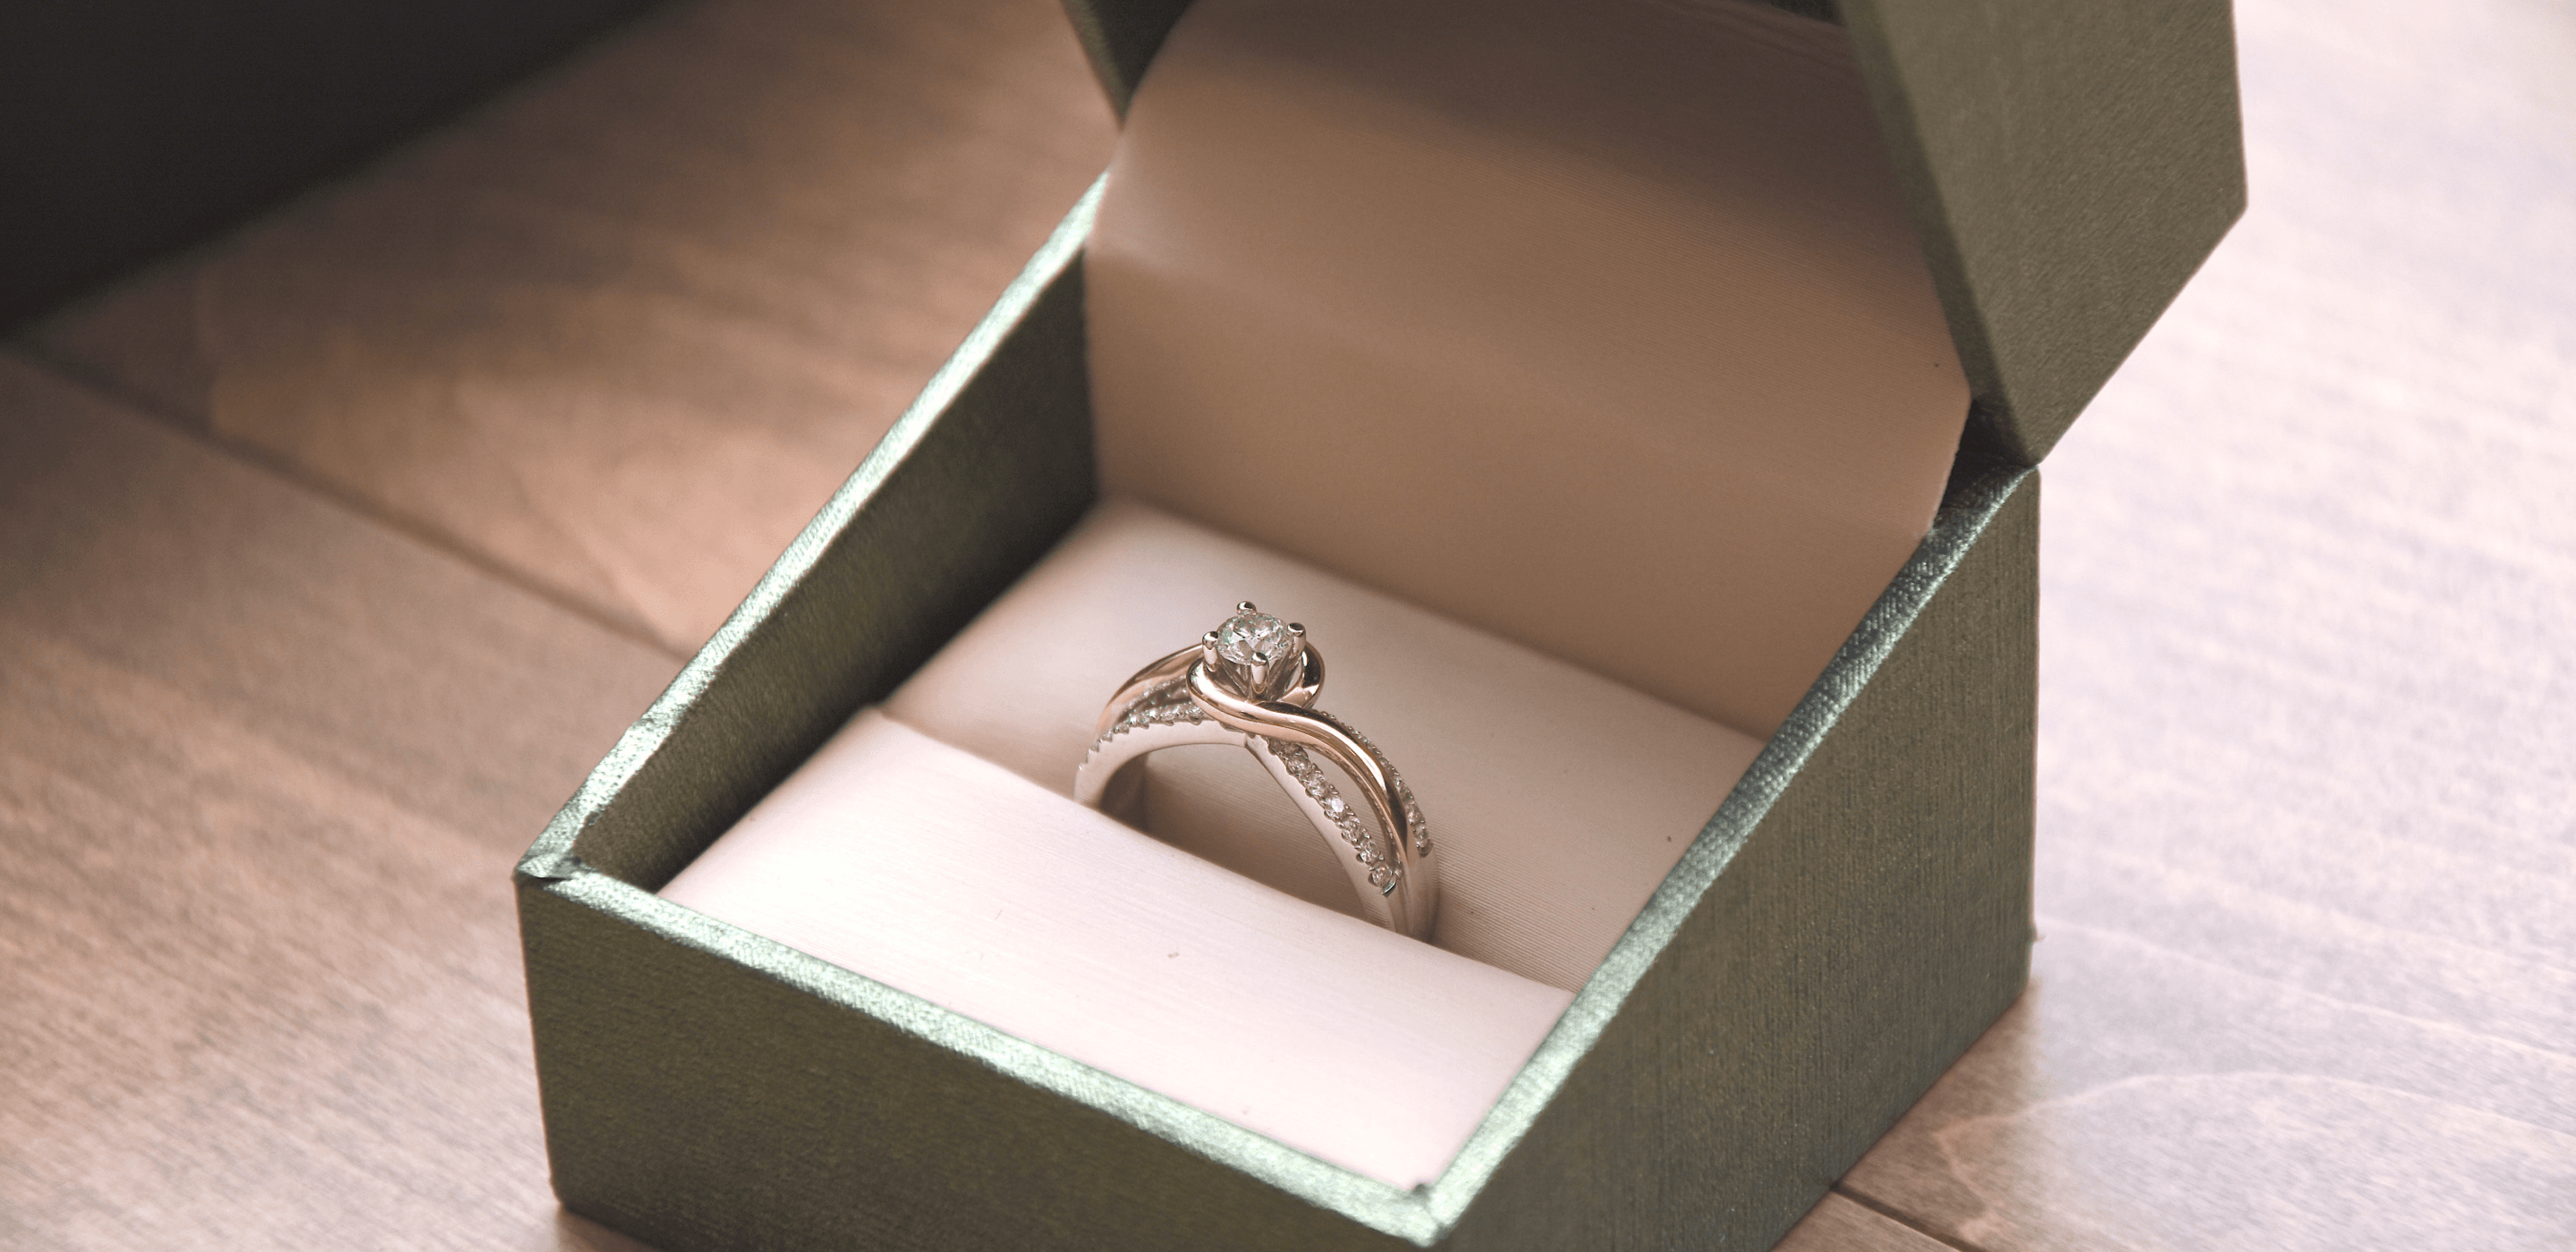 A Teilor engagement ring with an entwined band sits in a green ring box on a wooden table.